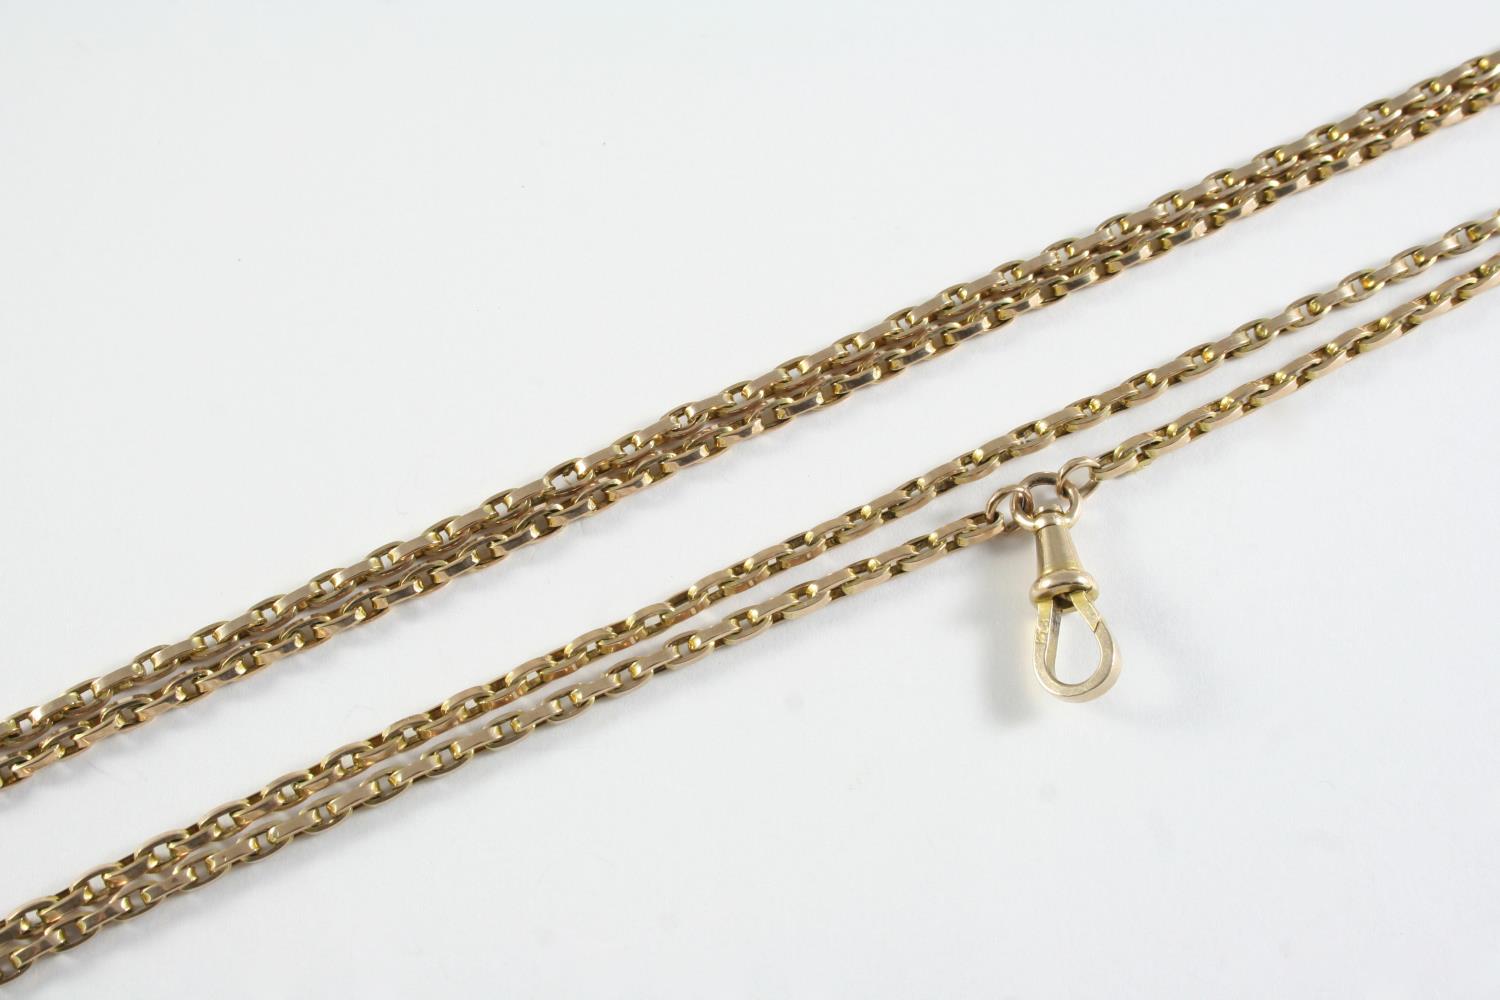 A 9CT GOLD OVAL LINK WATCH CHAIN 117cm long, 21.2 grams